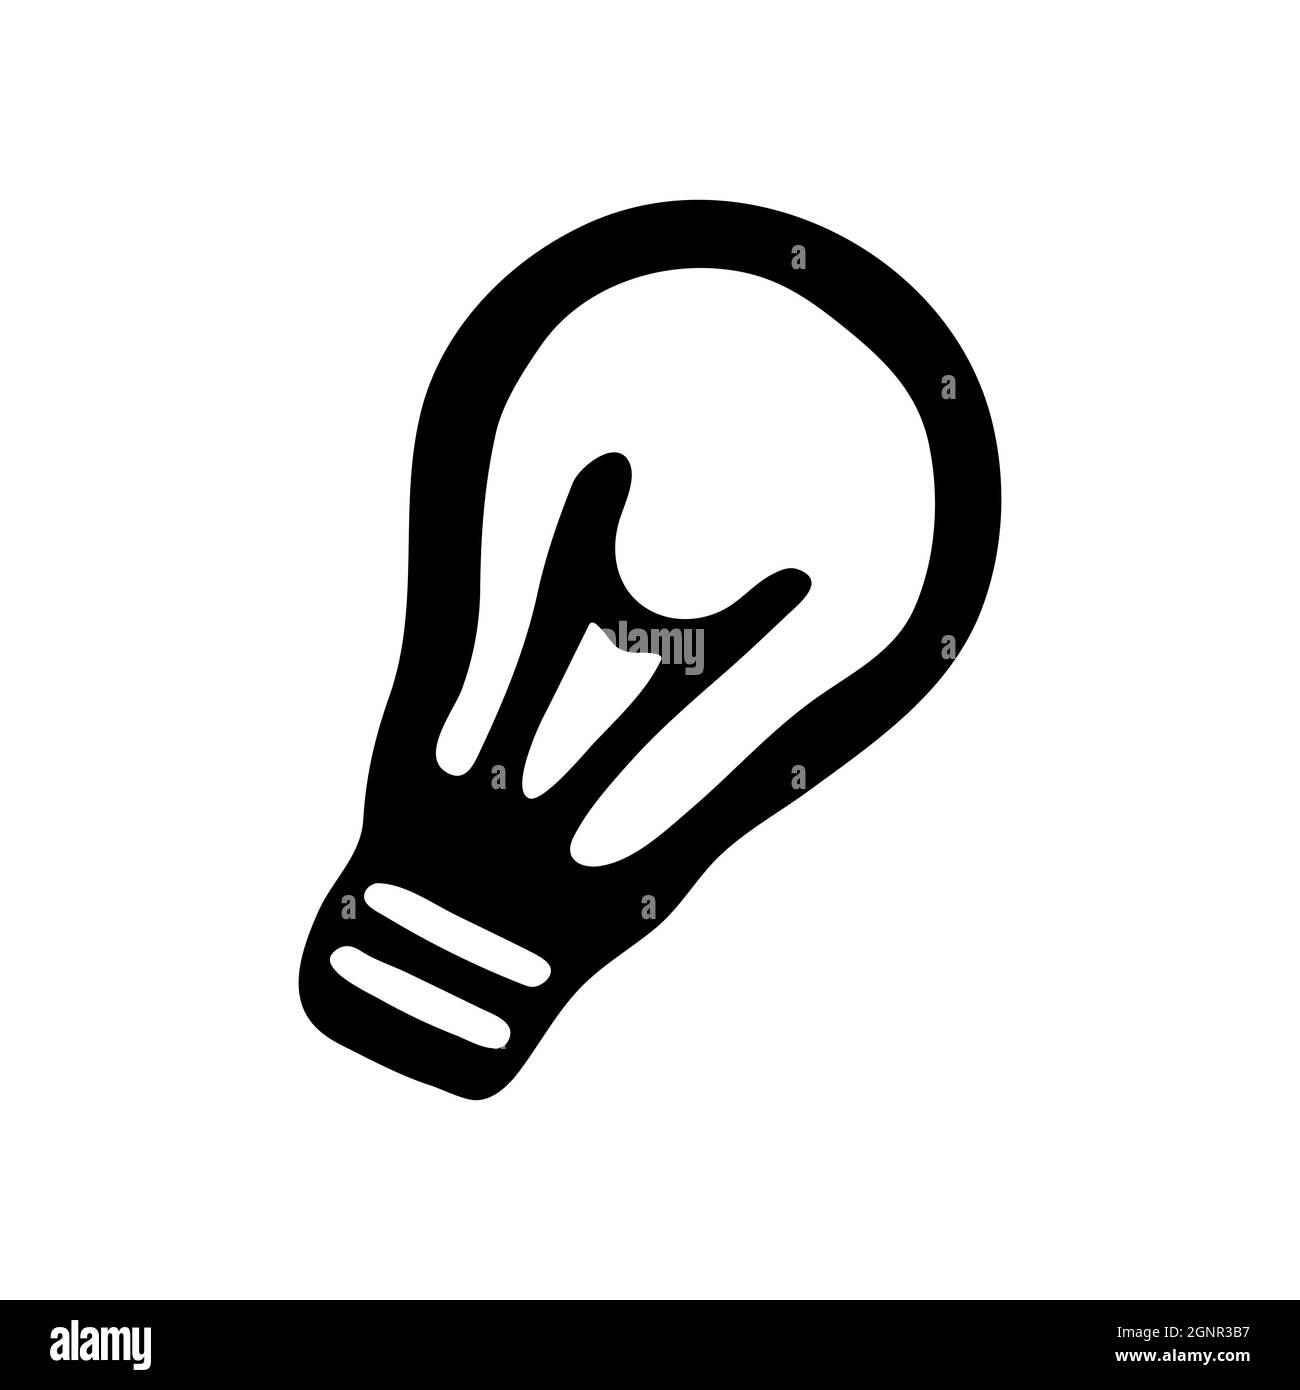 Hand drawn doodle style light bulb in vector. Isolated illustration on white background. For interior design, wallpaper, packaging, poster Stock Vector